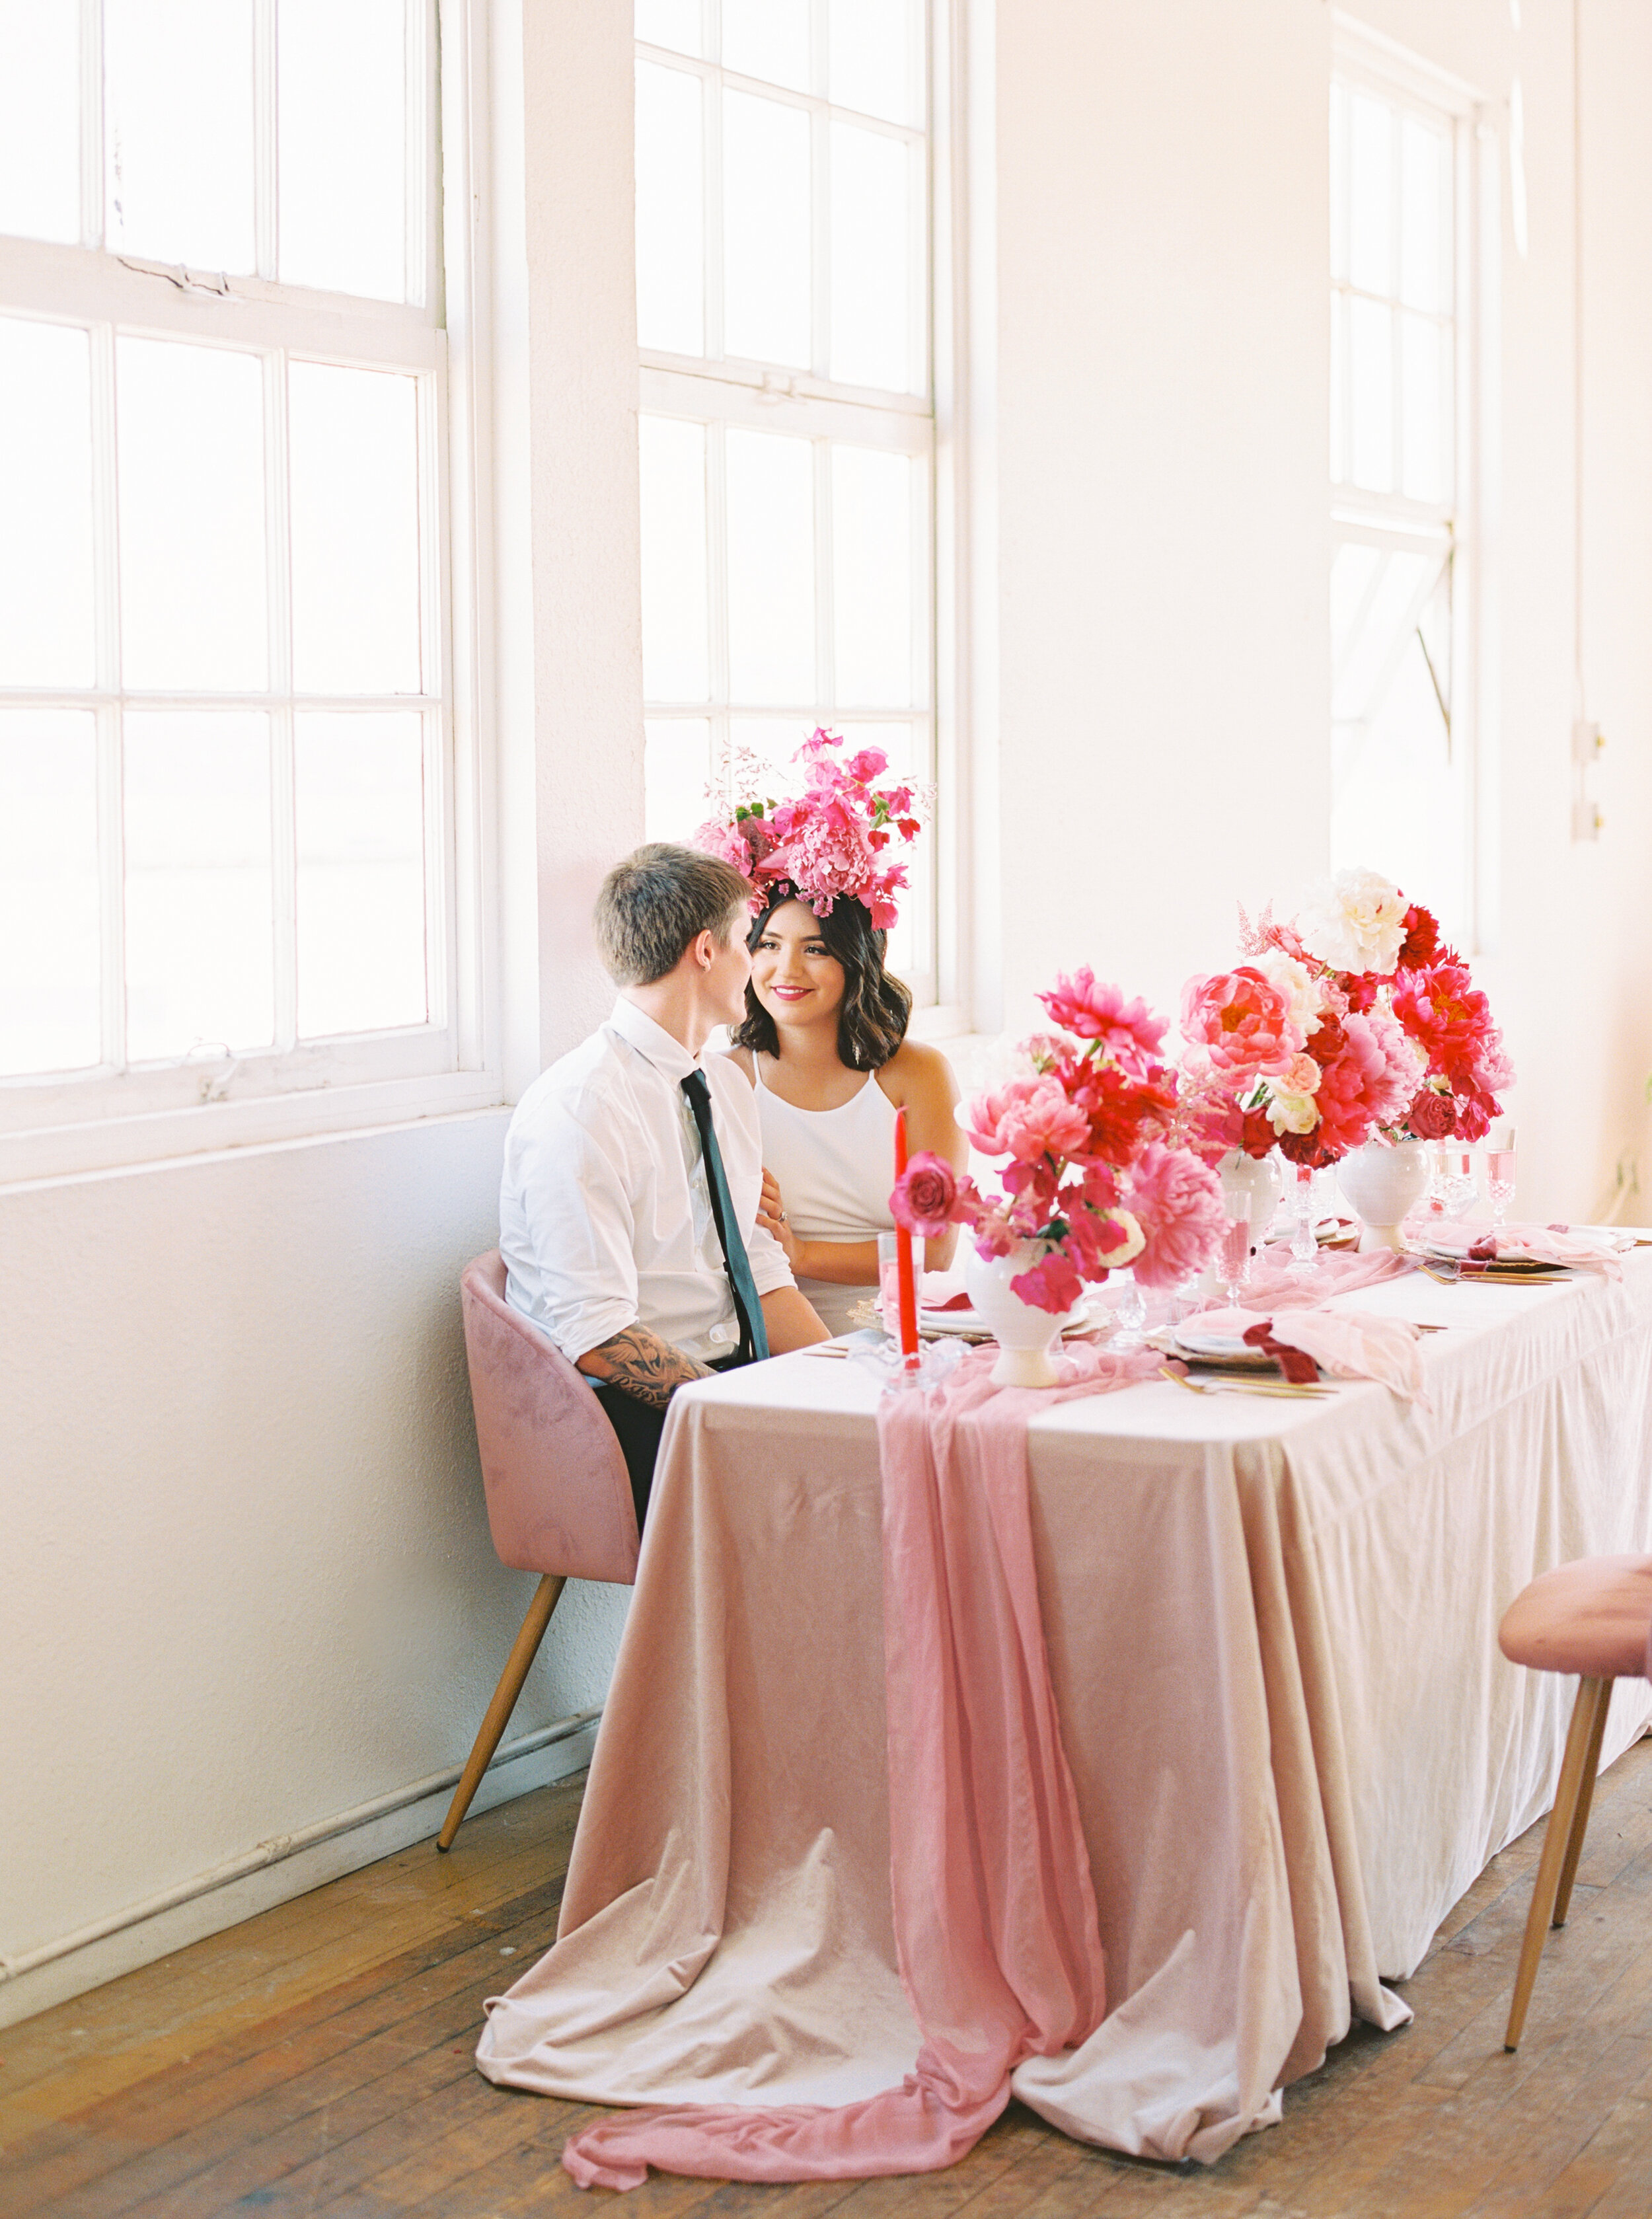 A Romantic Wedding Elopement Filled with Colorful Fuchsia - Sarahi Hadden Submission-56.jpg